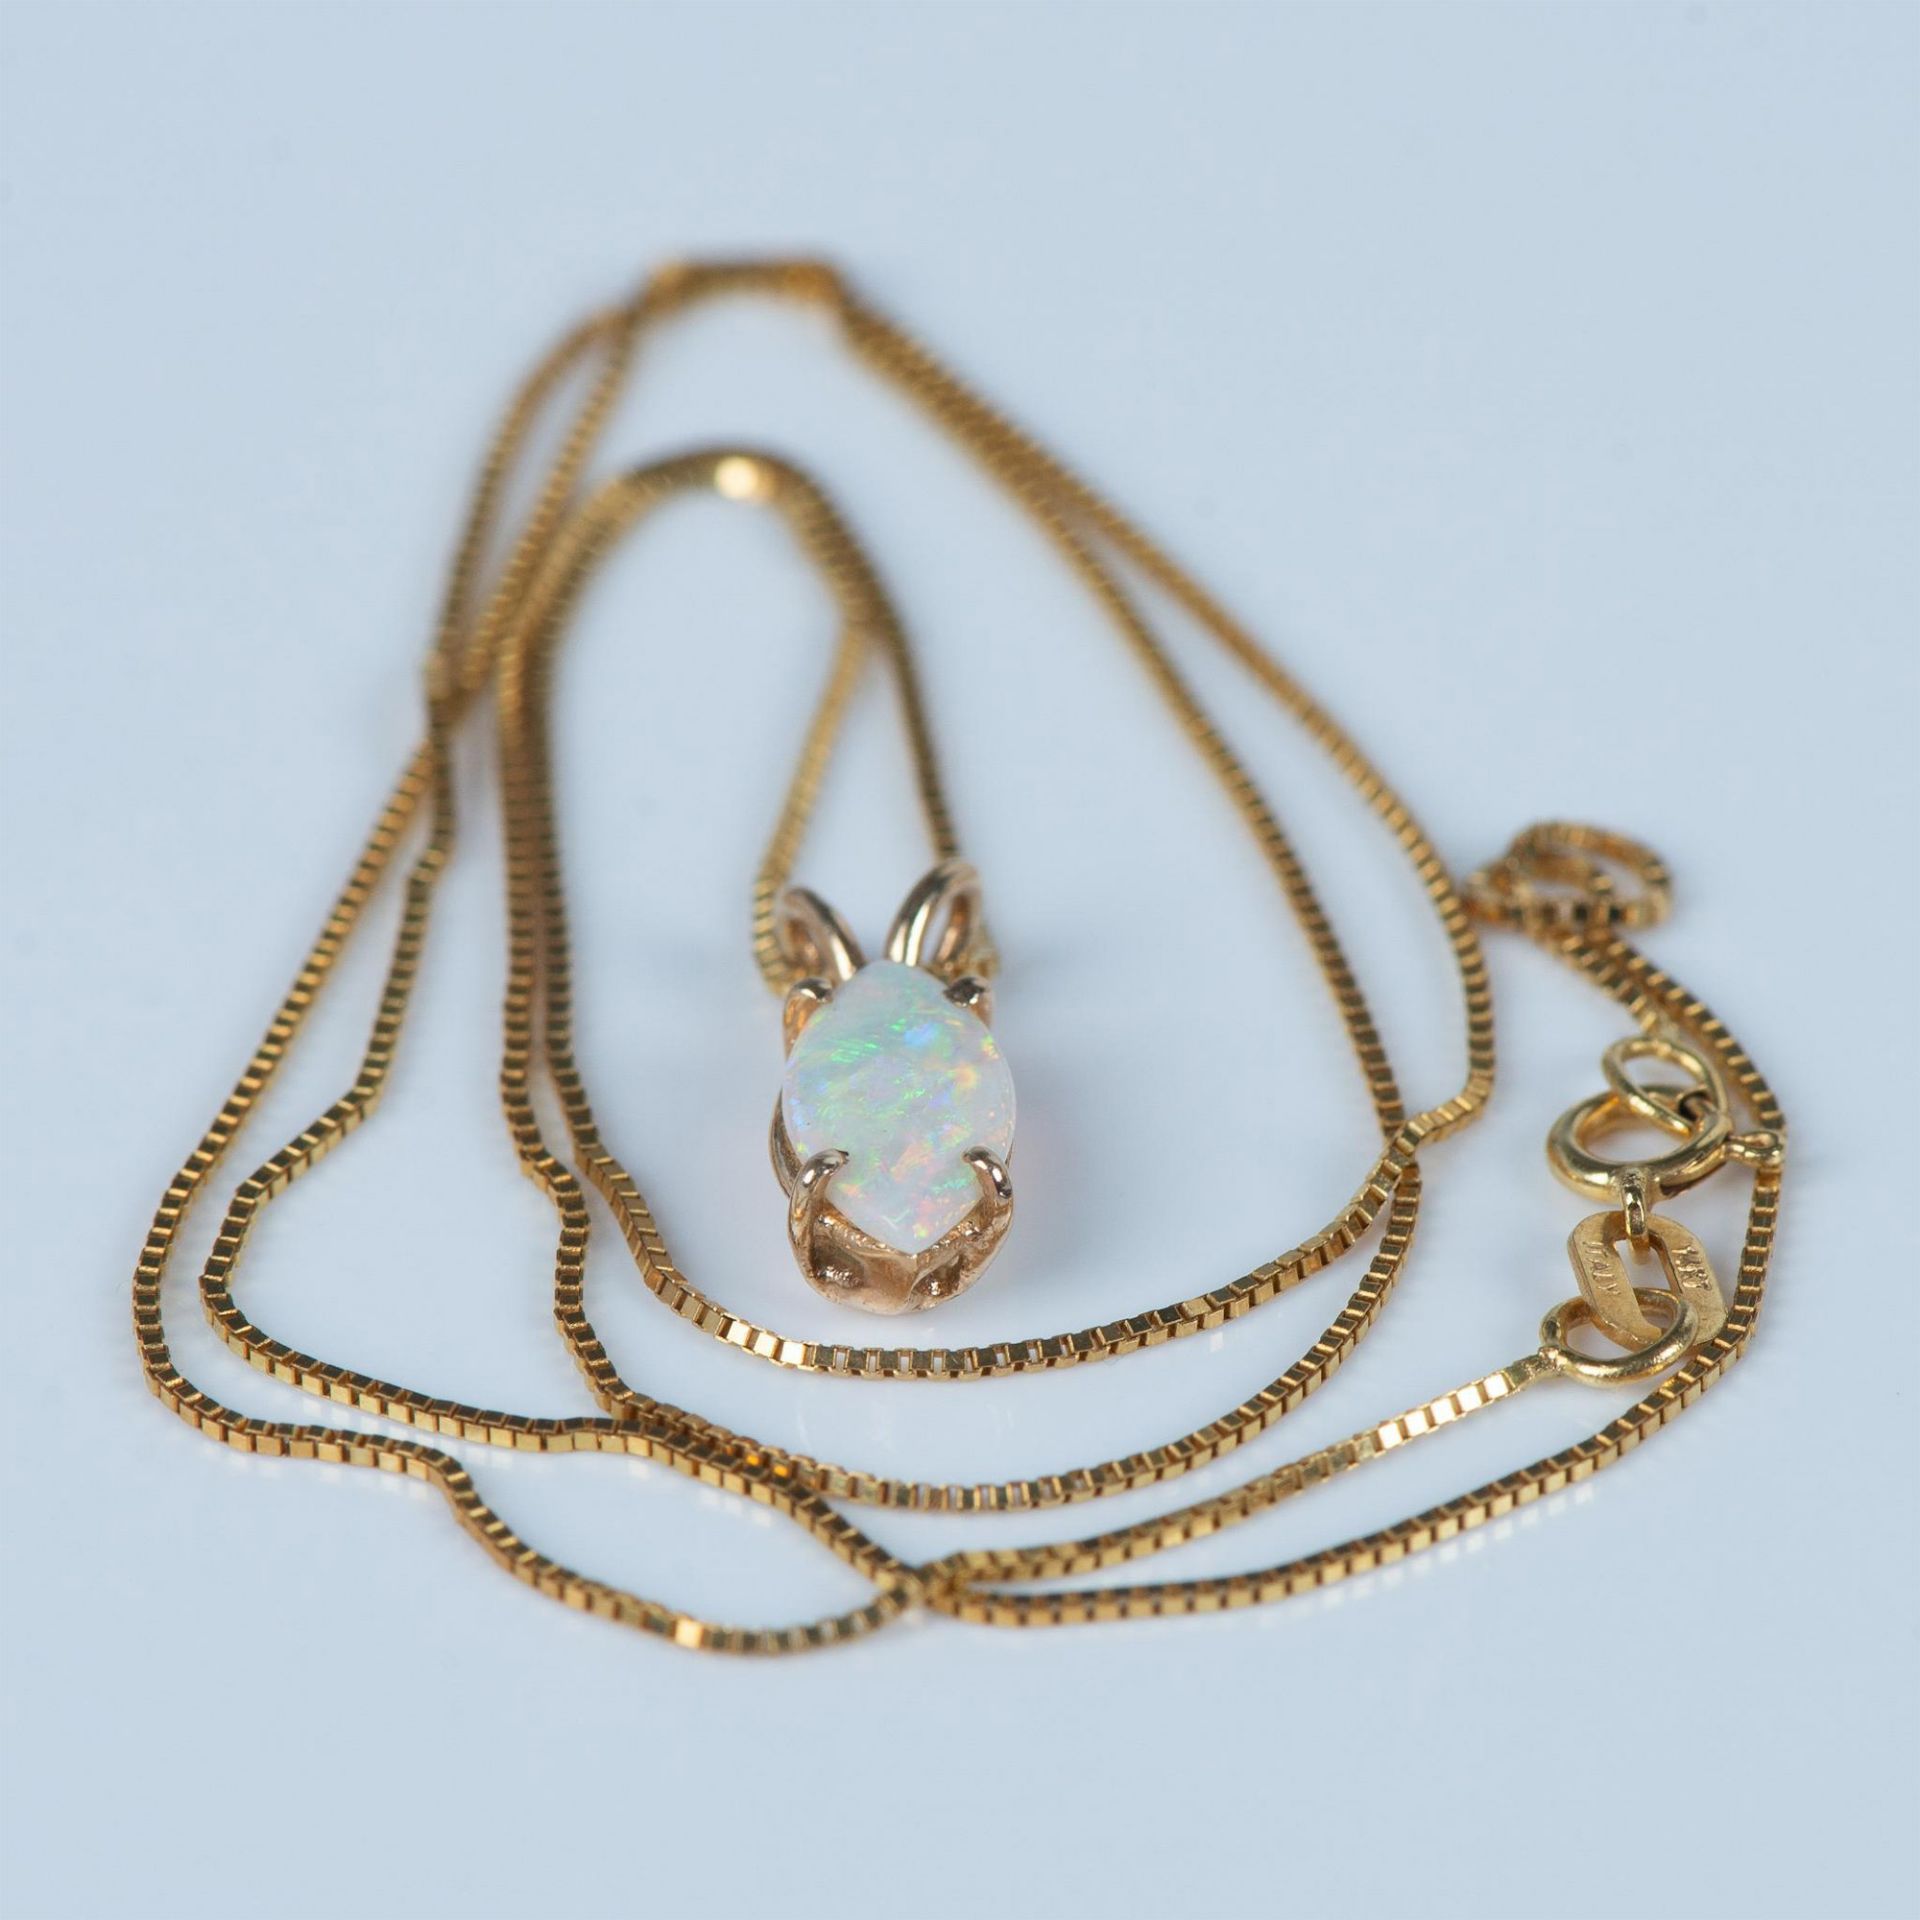 Delicate 14K Yellow Gold and Opal Necklace - Image 4 of 5